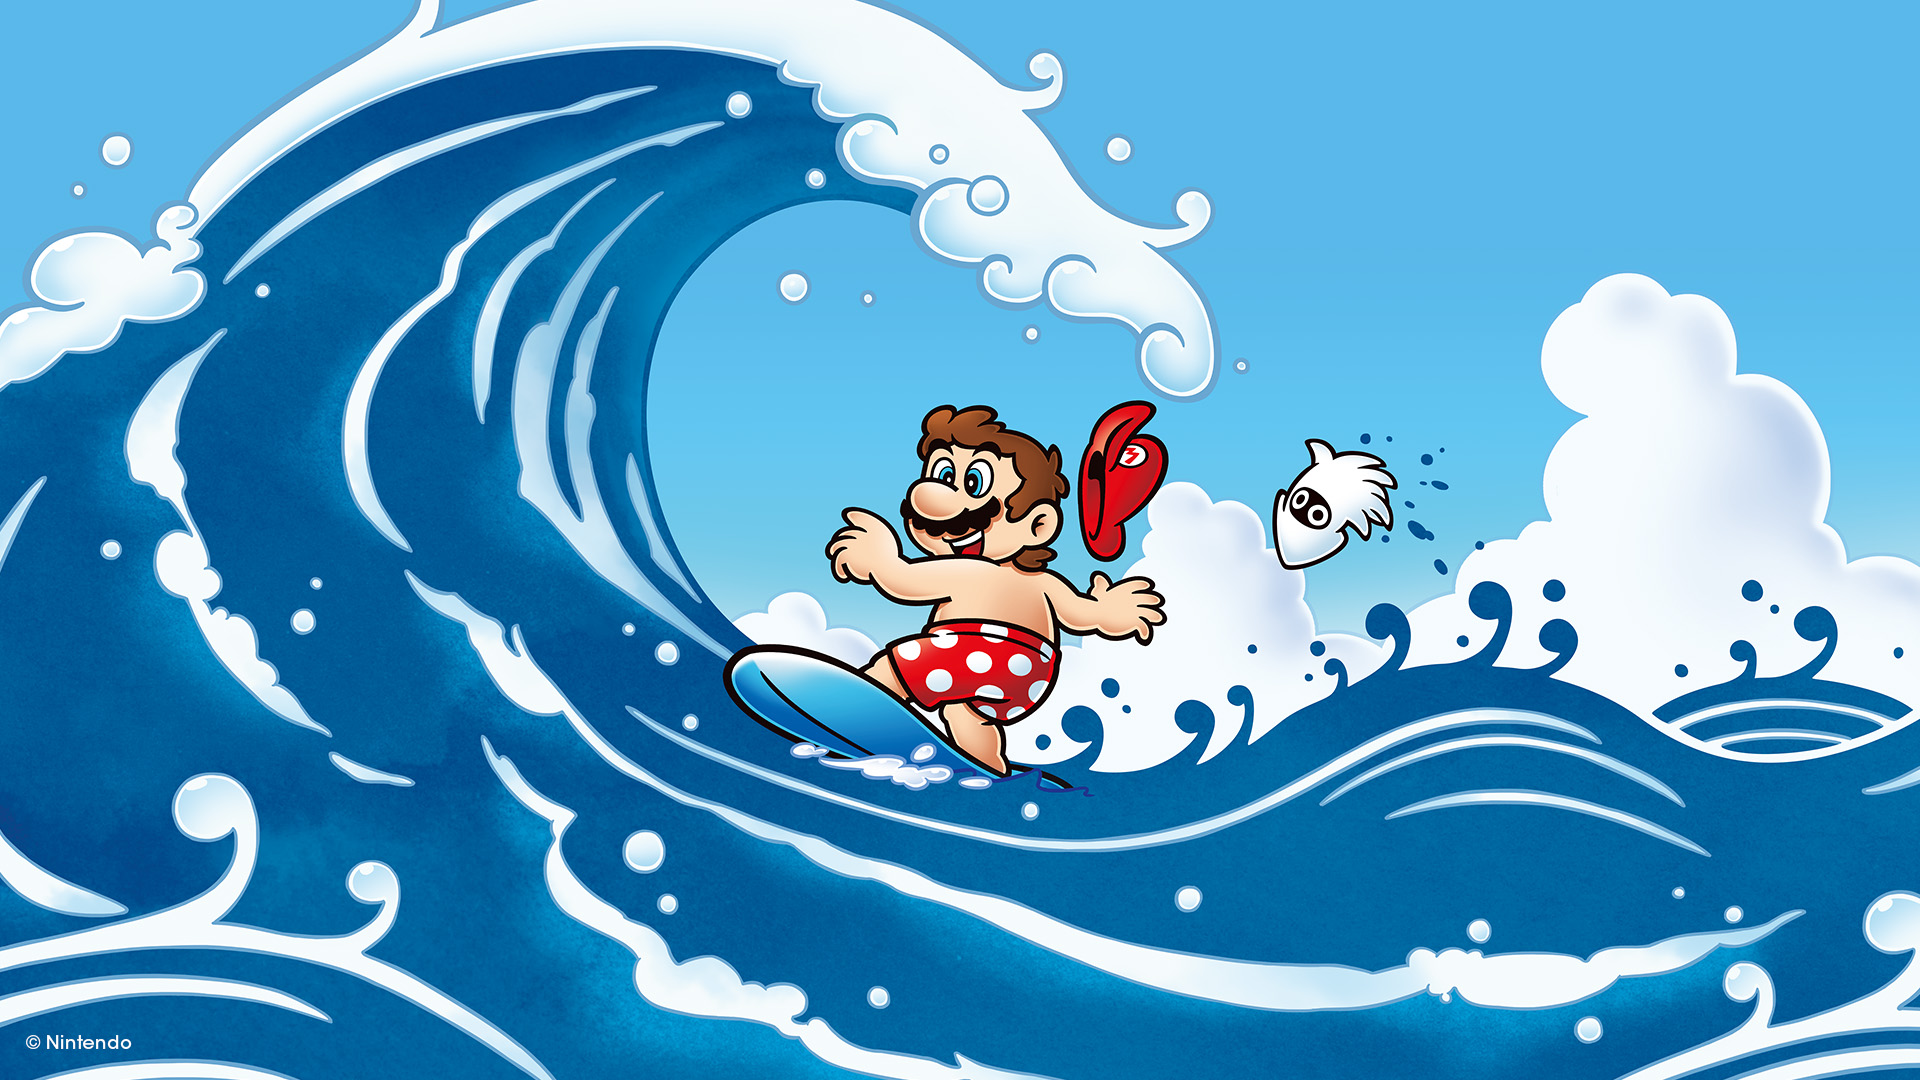 Mario decides to hide his chest this summer